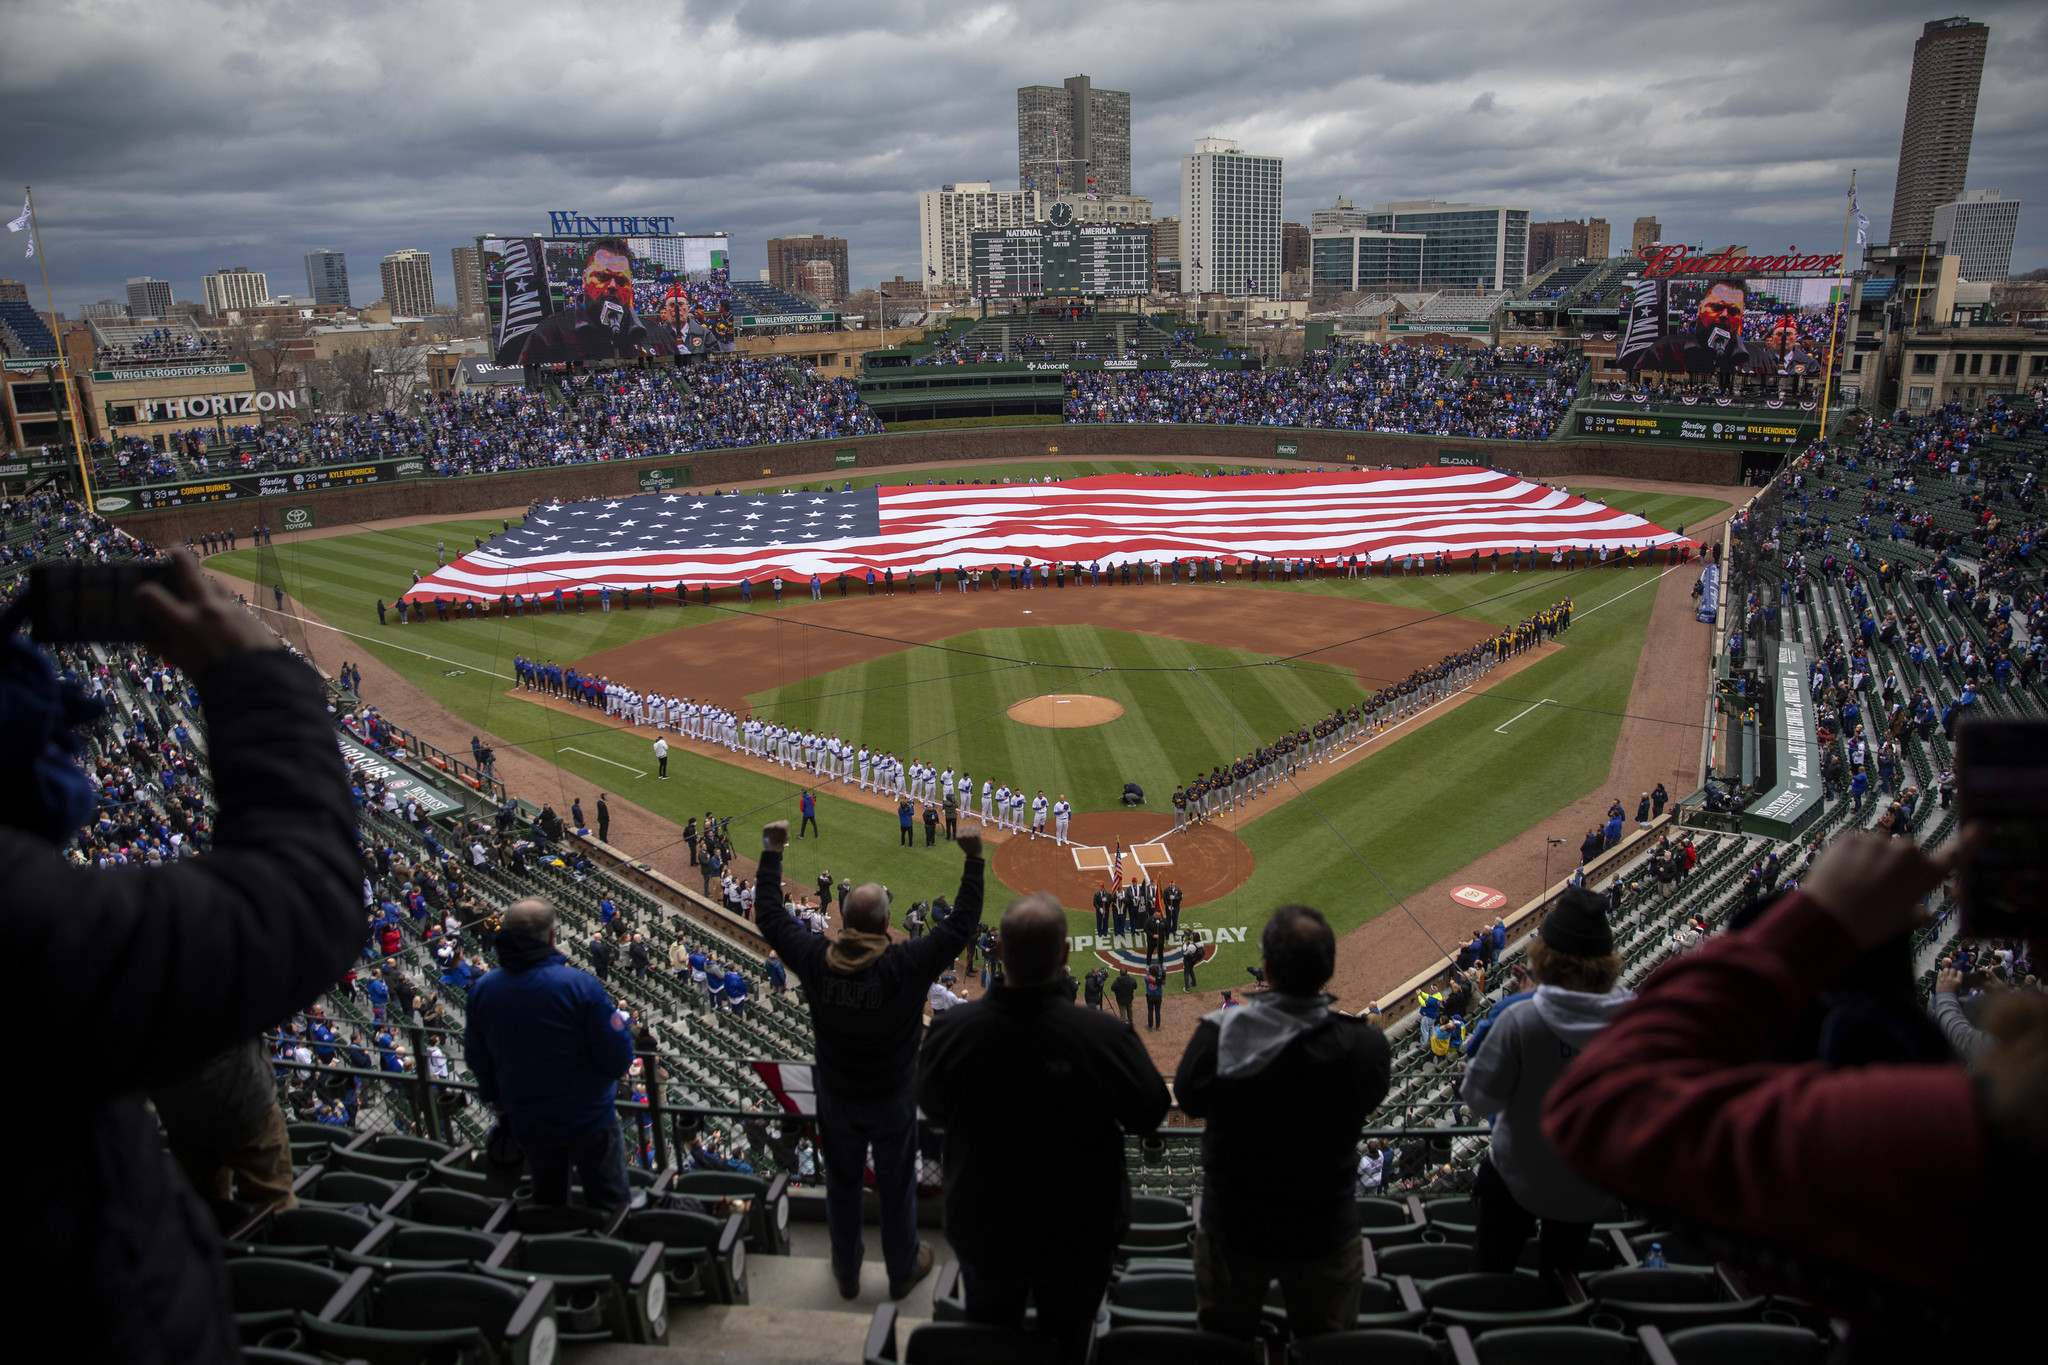 Chicago Cubs opening day 2023: Wrigley Field and ticket info